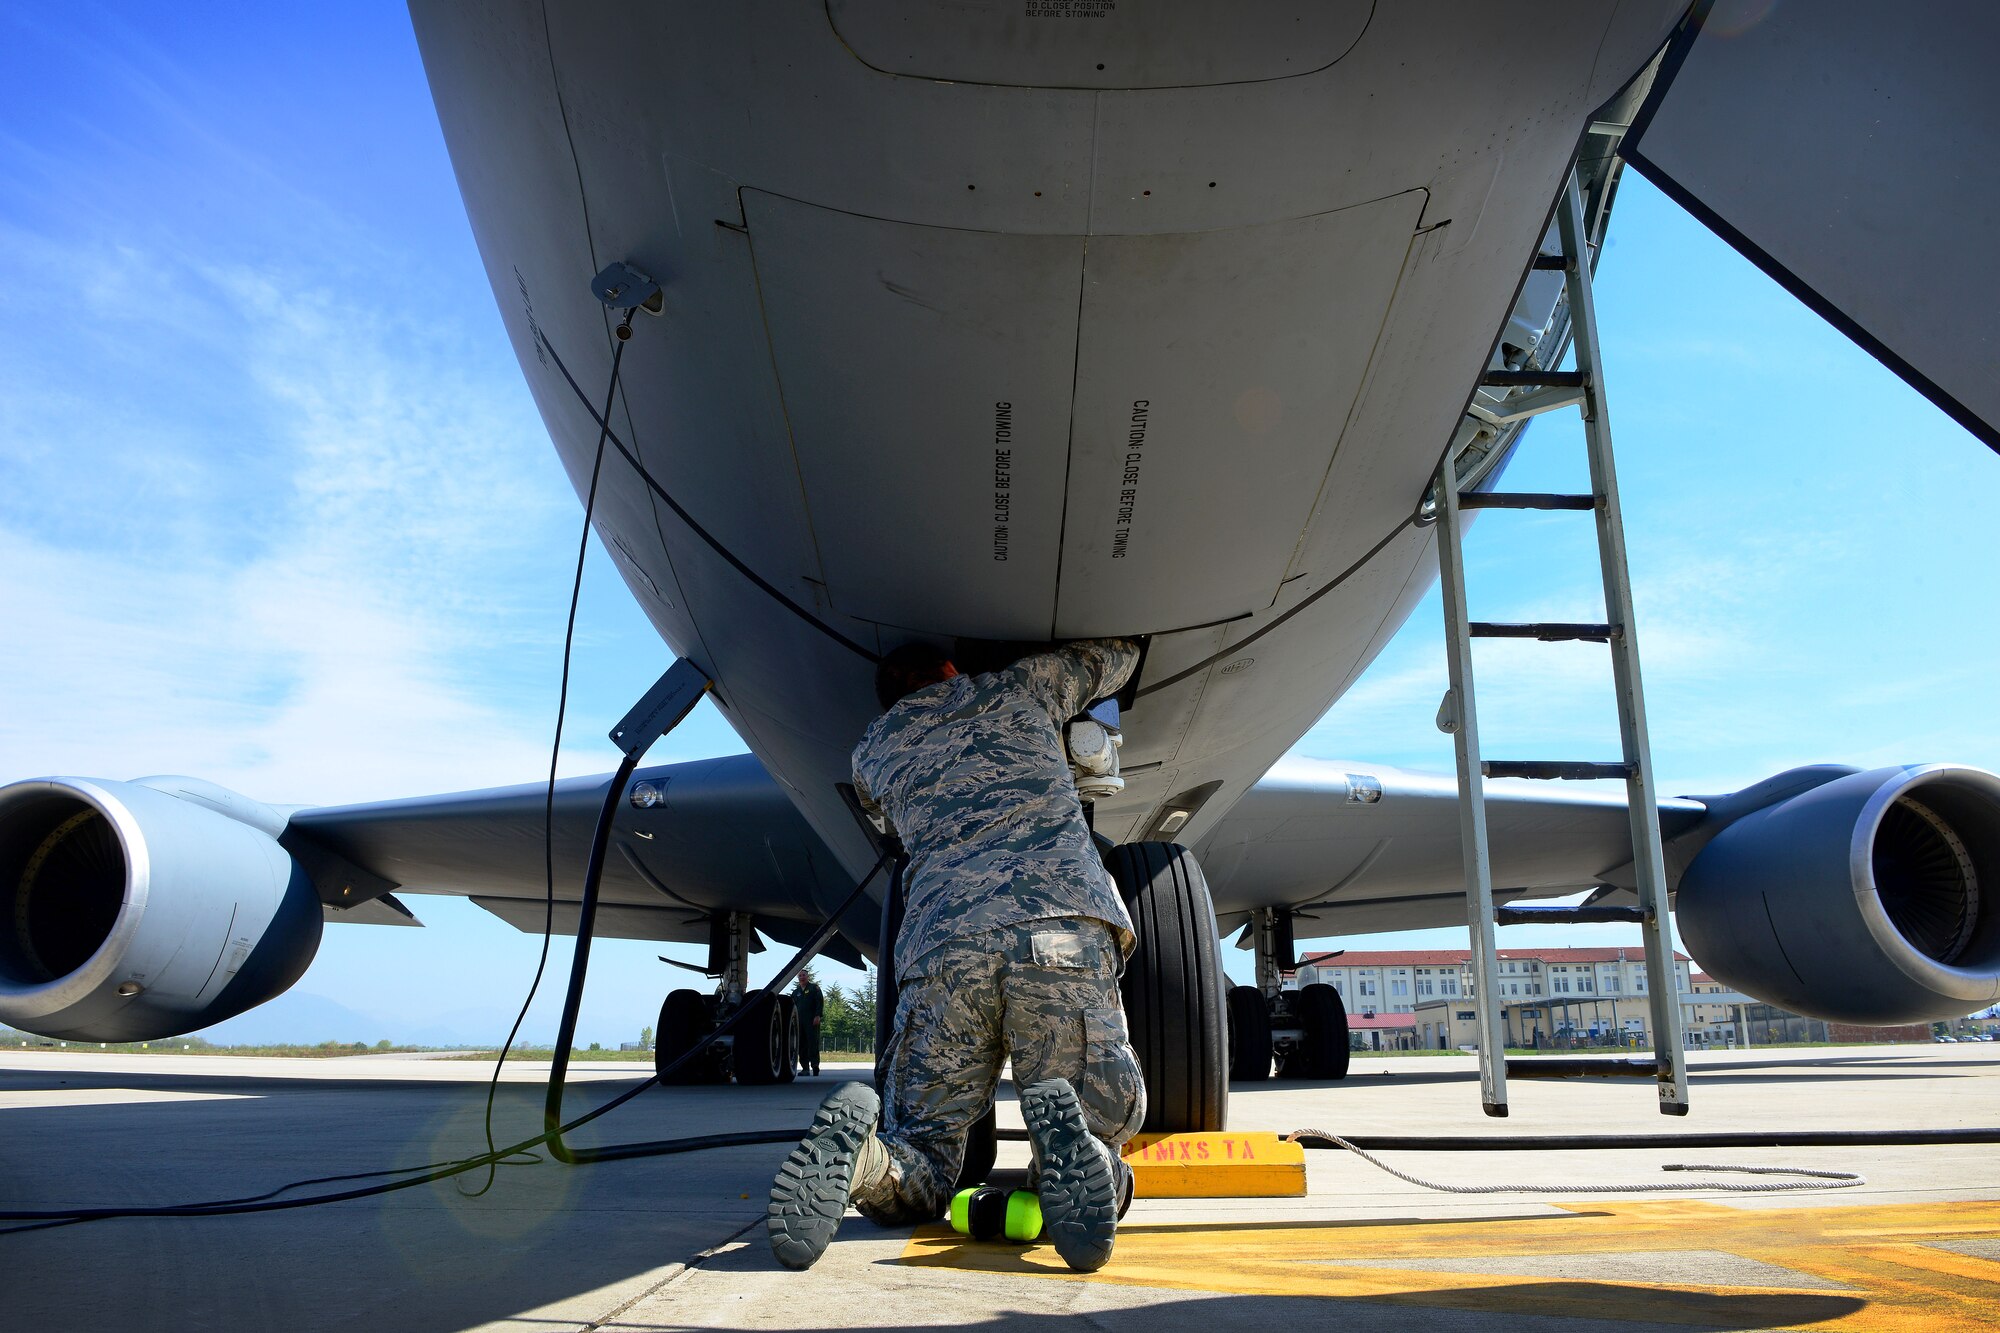 U.S. Air Force Tech. Sgt. John Sanders, 507th Air Refueling Wing from Tinker Air Force Base, Okla., Aircraft Maintenance Squadron dedicated crew chief, tightens a bolt on a KC-135 Stratotanker, April 21, 2015, at Aviano Air Base, Italy. The 507th ARW’s KC-135s allowed the 31st Fighter Wing’s F-16 Fighting Falcons to practice in-flight refueling missions. (U.S. Air Force photo by Senior Airman Matthew Lotz/Released)